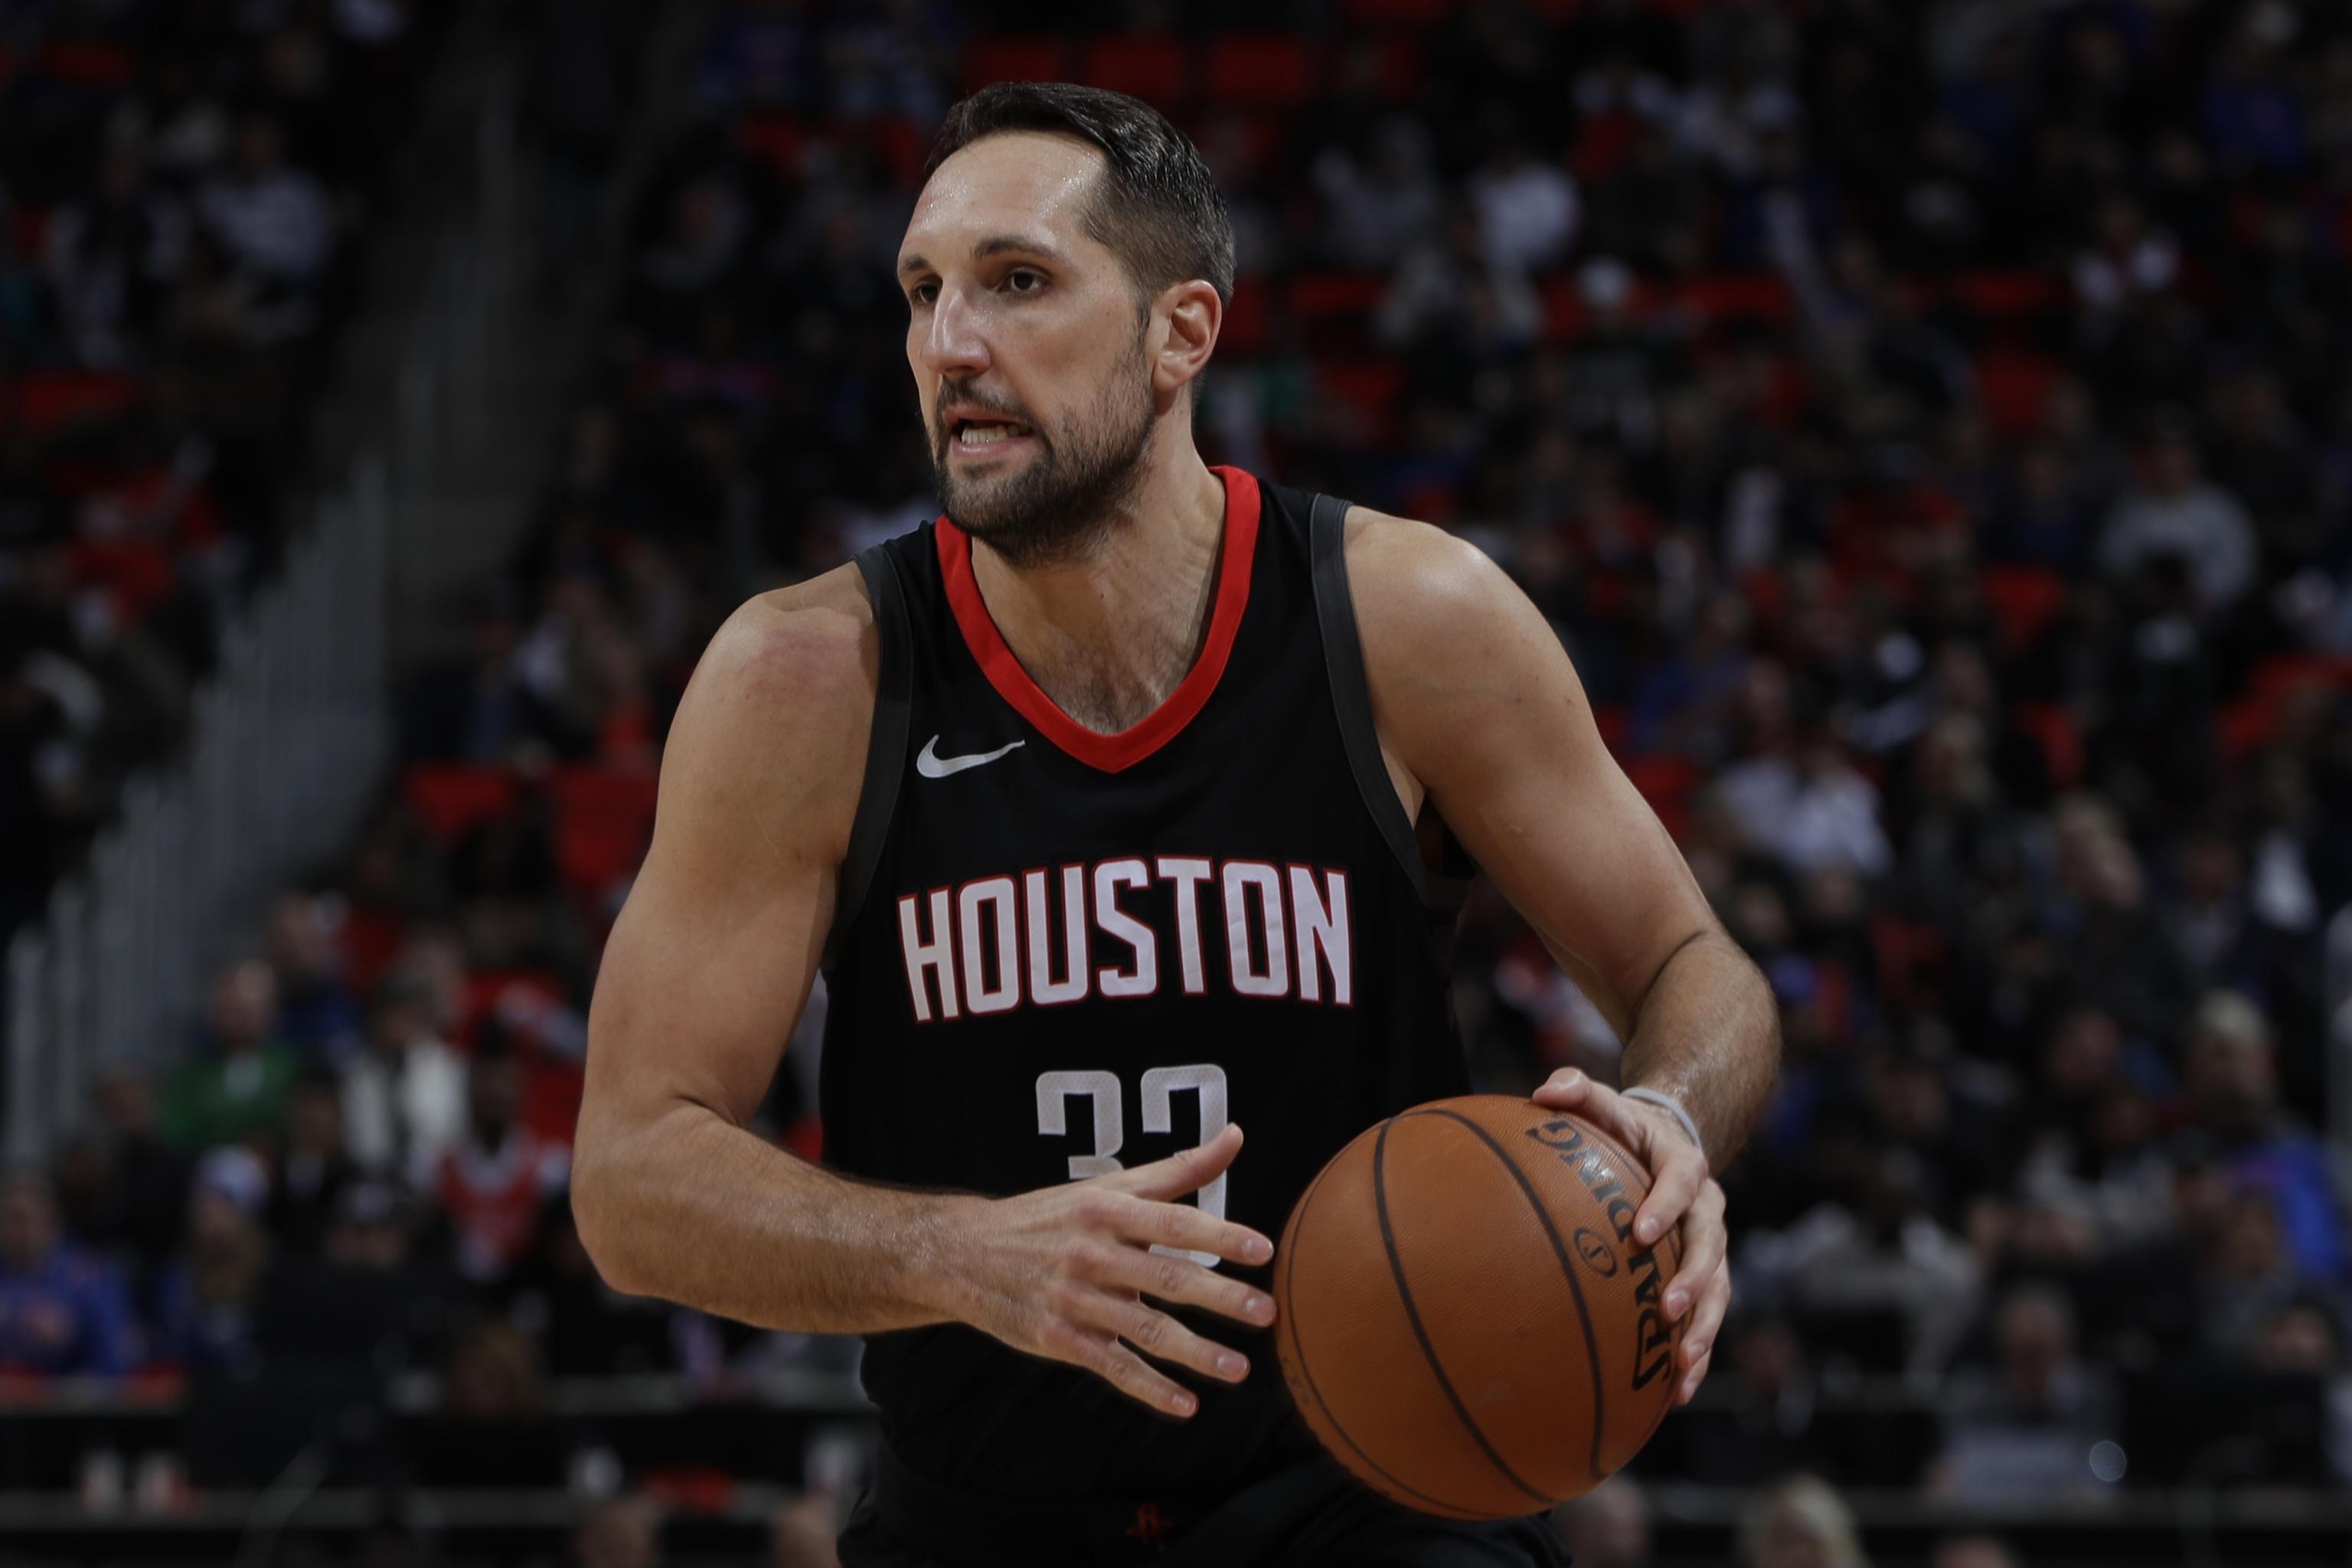 Nba Trade Rumors Suns Still Looking For Starting Pg After Ryan Anderson Deal Bleacher Report Latest News Videos And Highlights